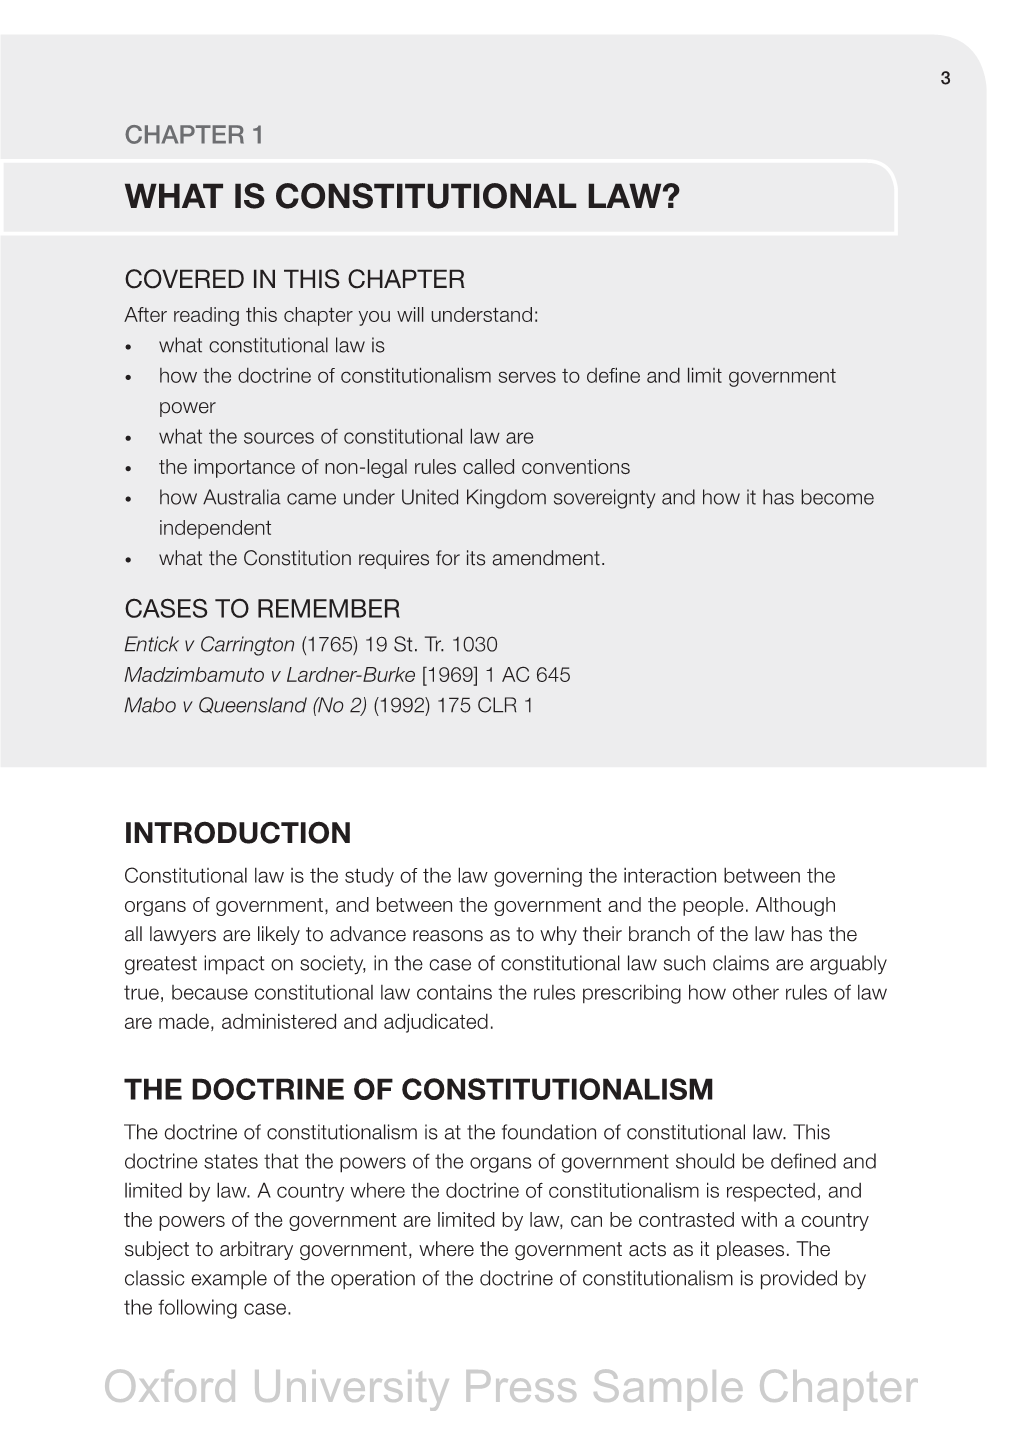 What Is Constitutional Law?